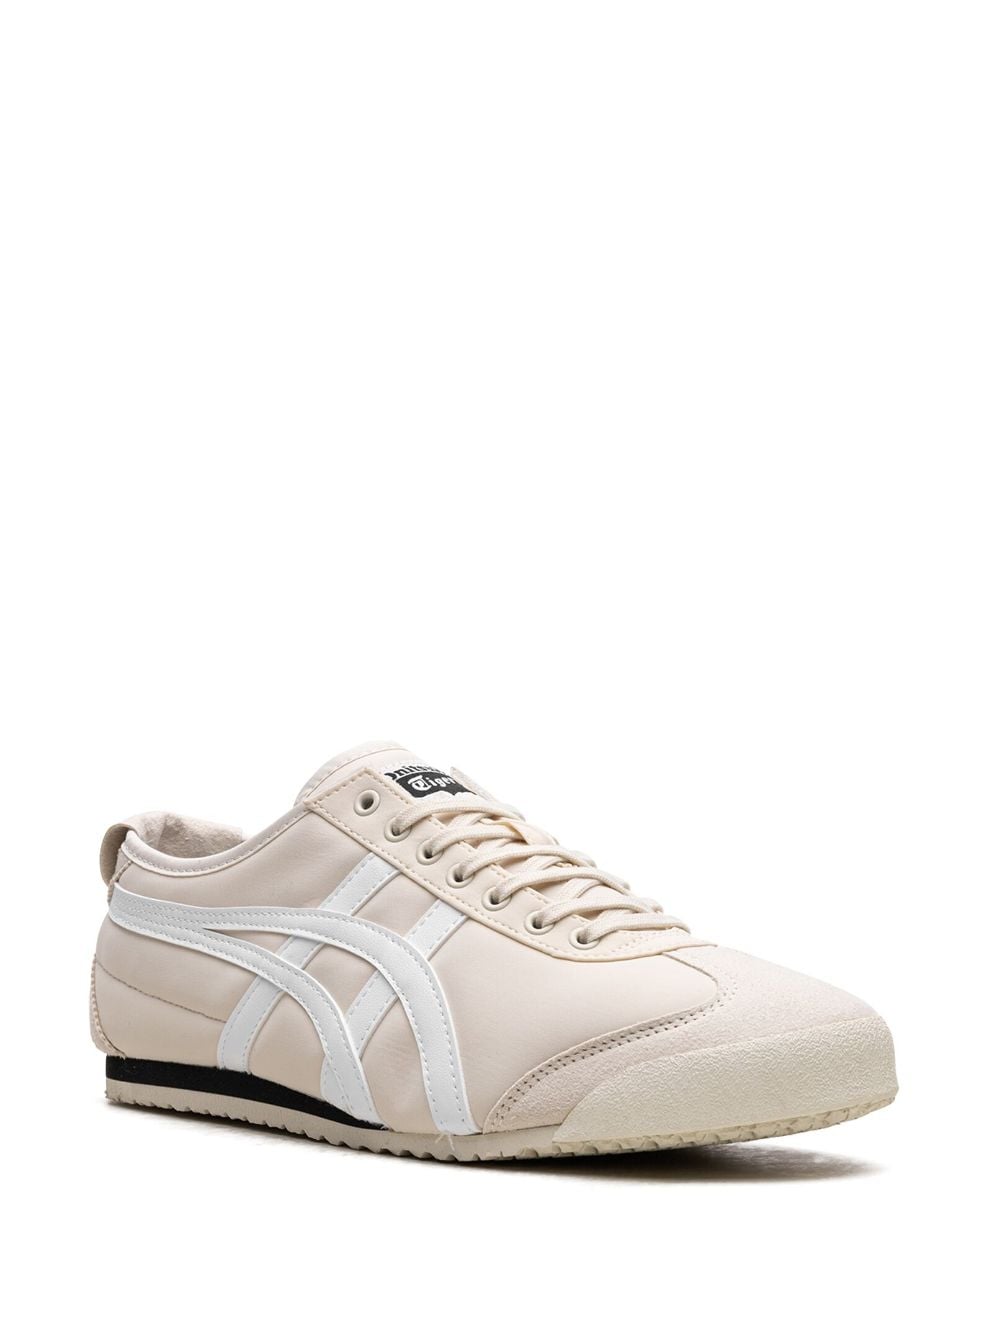 Image 2 of Onitsuka Tiger Mexico 66 "Birch/White" sneakers